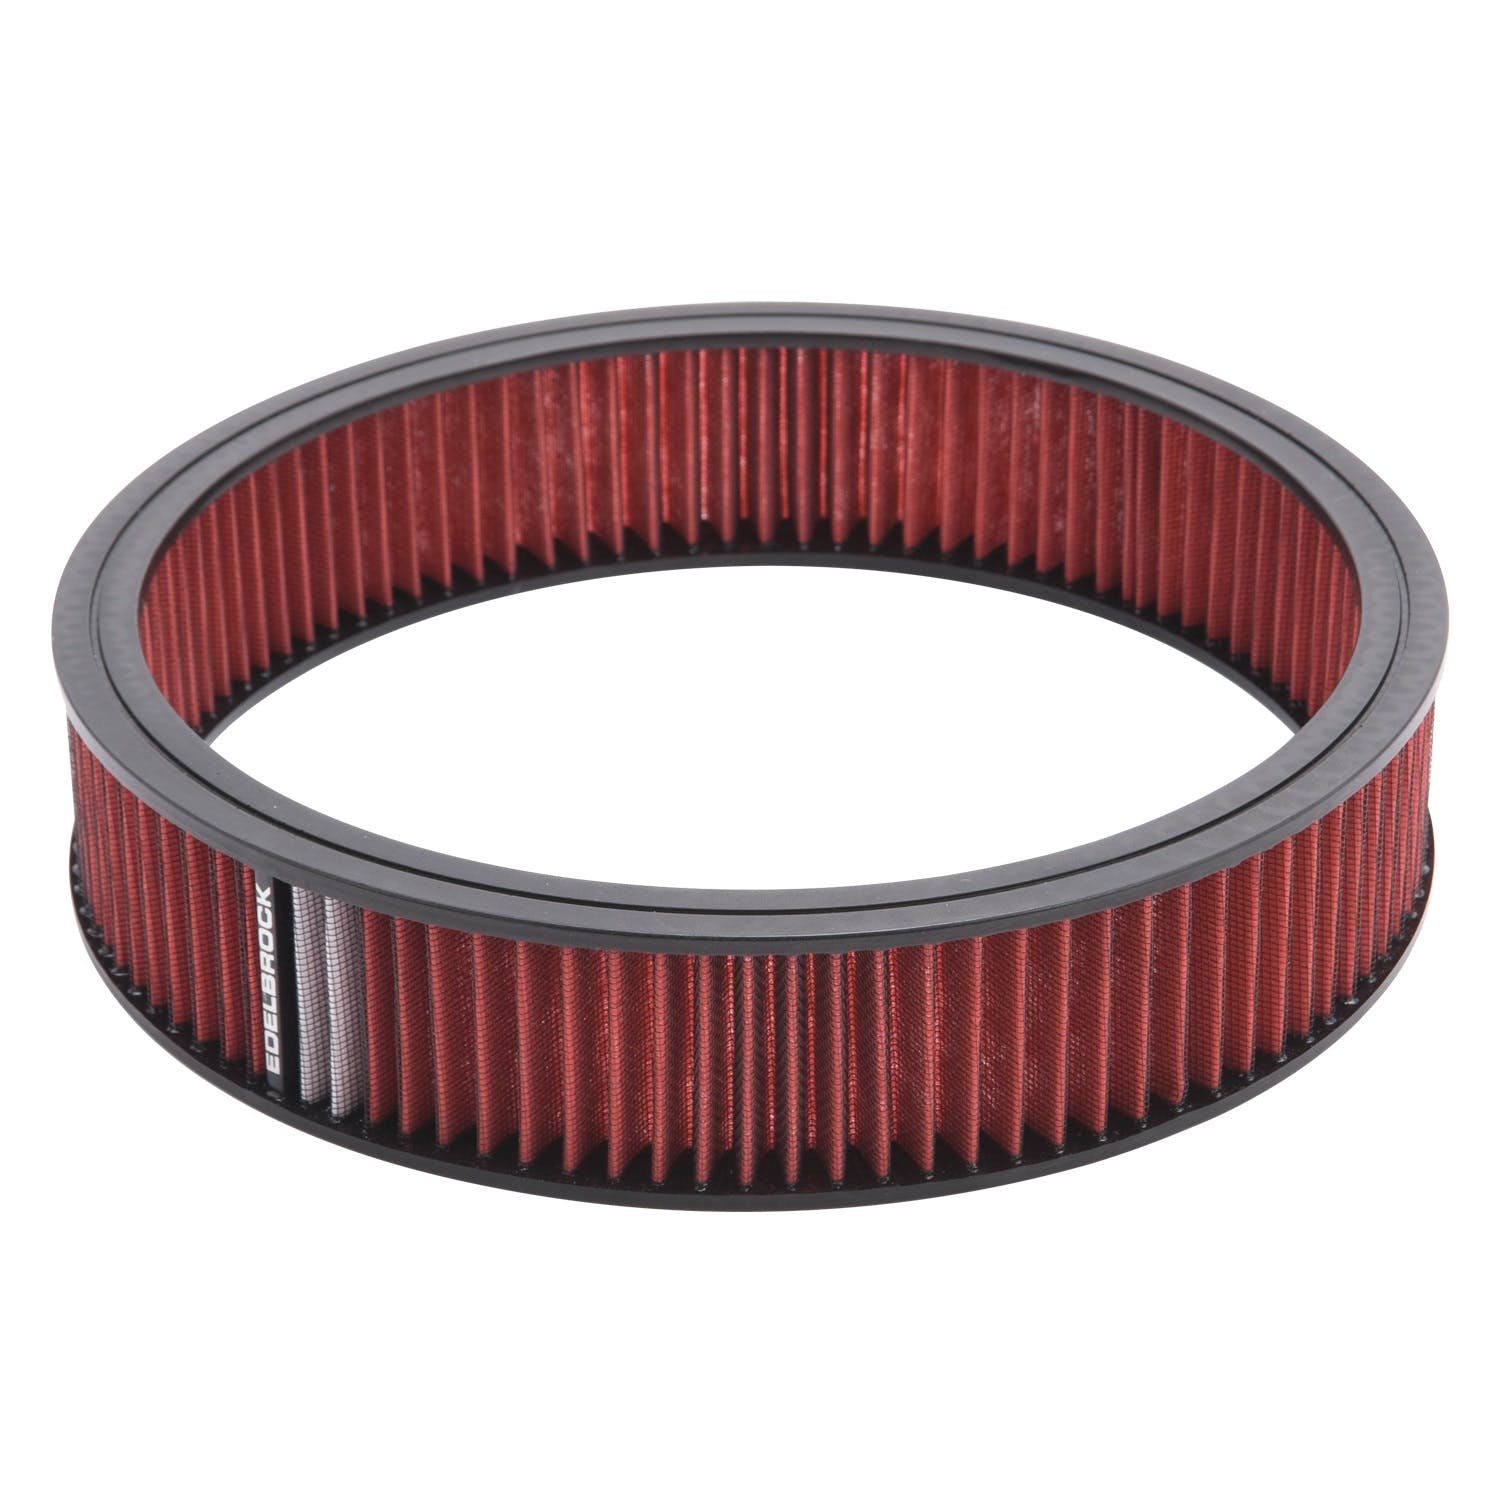 Edelbrock 43666 Pro-Flo 14 Round Air Cleaner Element Only (Red)